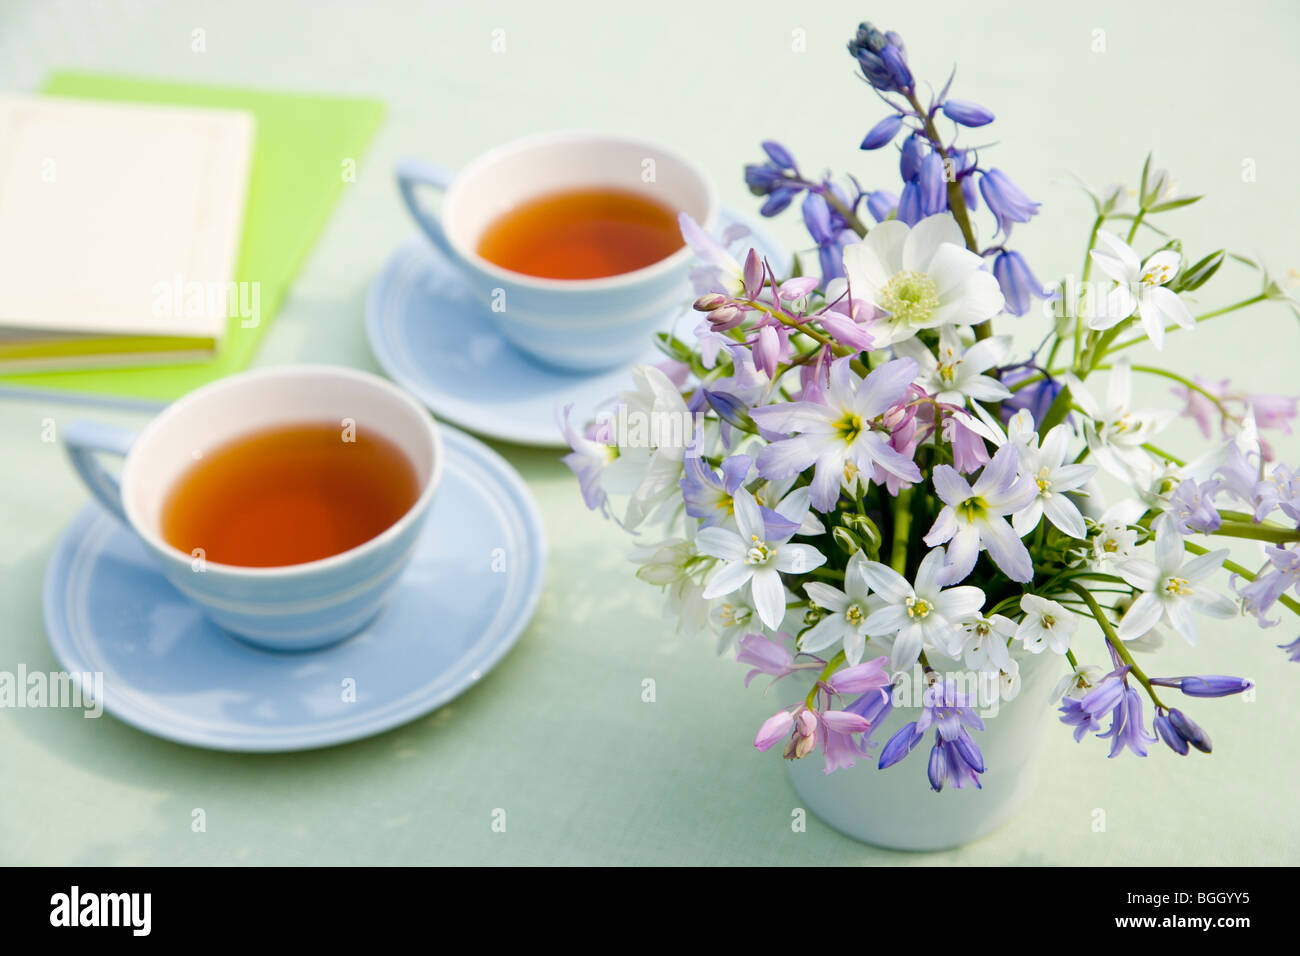 Cups of tea and a vase of flowers Stock Photo